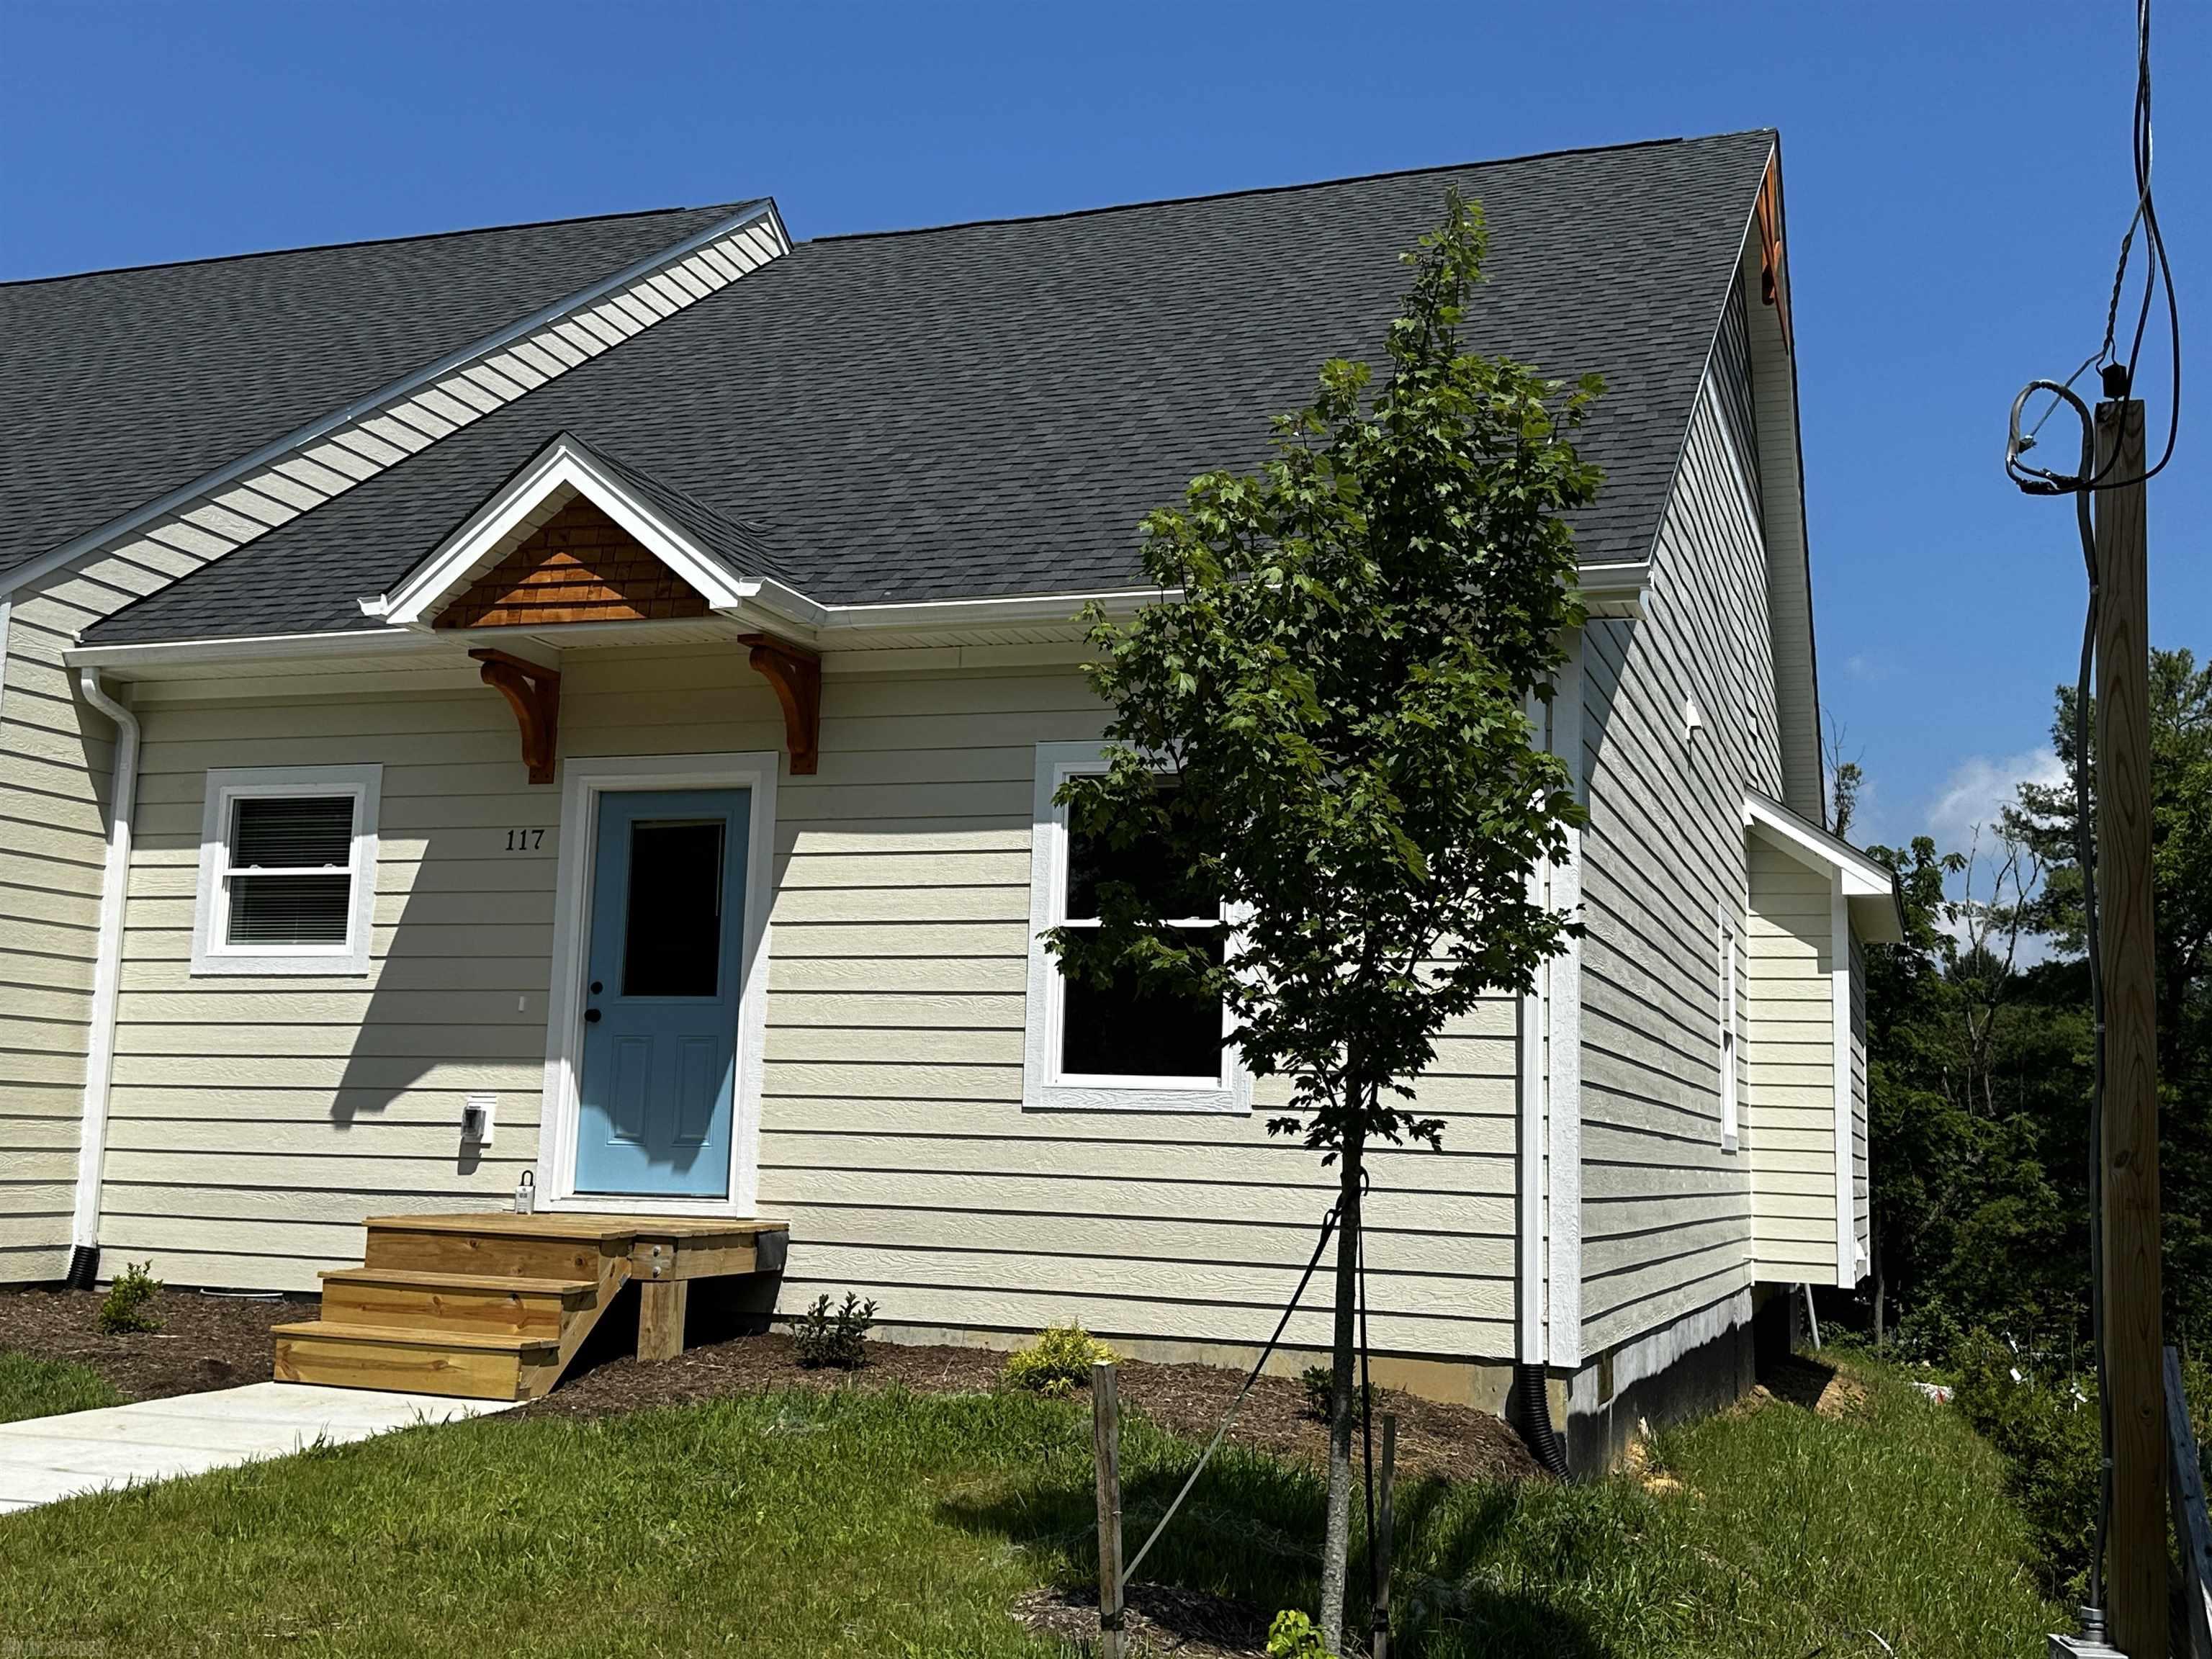 Sited on the corner of N. Main & Mt. Tabor Rd,  check out these 6 new contruction twinhomes.  Just minutes to downtown Blacksburg & VT. This one level twinhome has an open kitchen, living & dining rooms. The primary bedroom has a private bath with tiled, step in shower & double sink vanity. Gray kitchen cabinets, SS appliances, granite countertops & red oak hardwood flooring throughout. Exterior finish is LP Smart siding with factory finish. HOA fees cover exterior maintenance, common area mowing & landscaping, some insurance. On going construction, please use caution when touring.